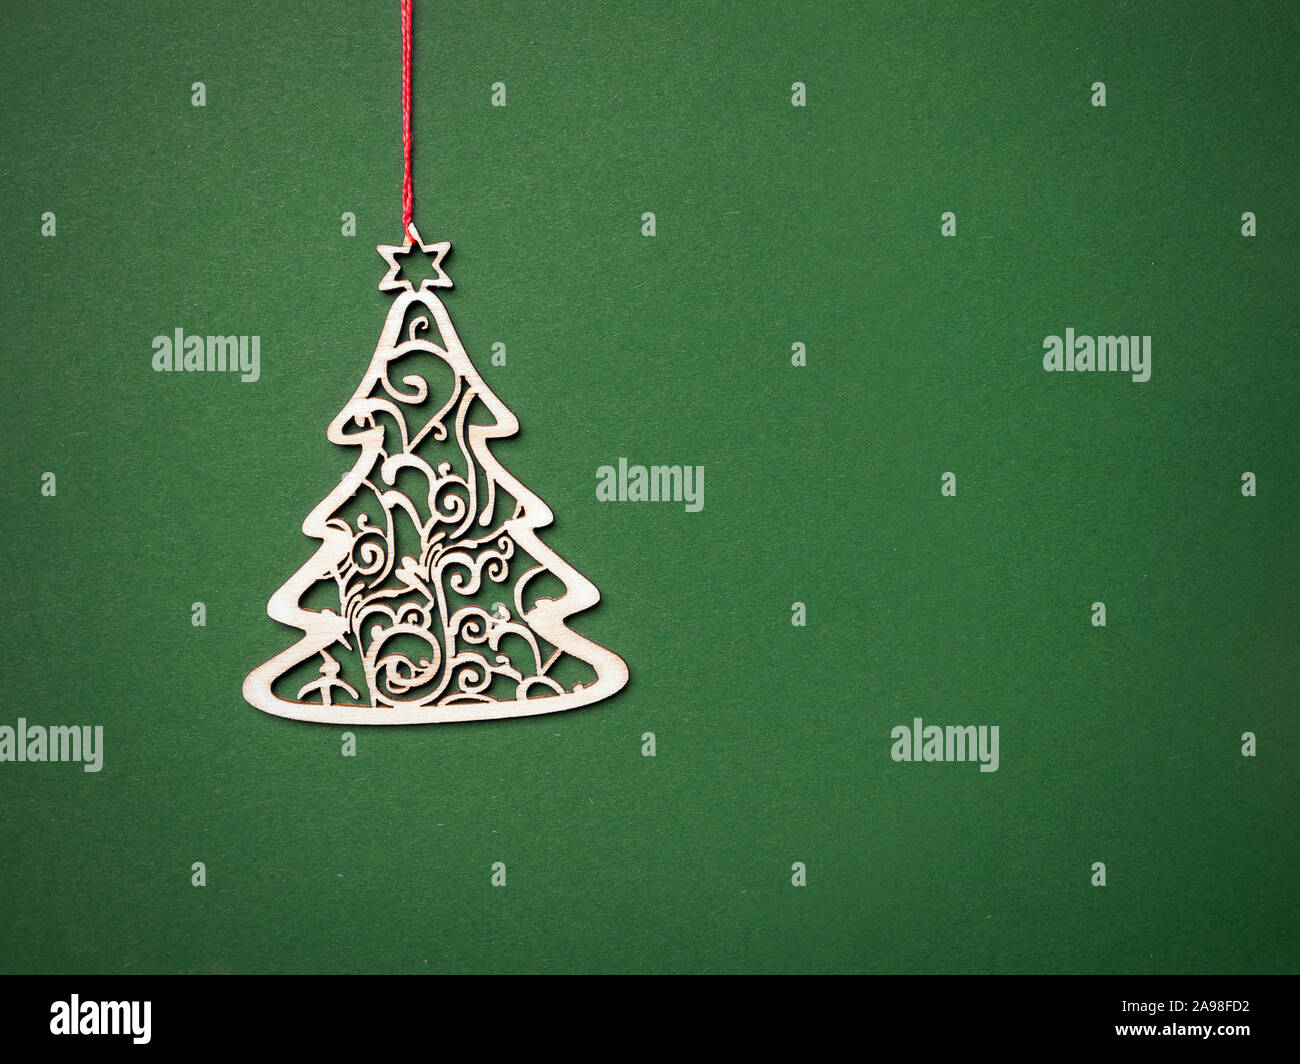 Wooden cut-out ornamental christmas tree hanging on red string against green background Stock Photo